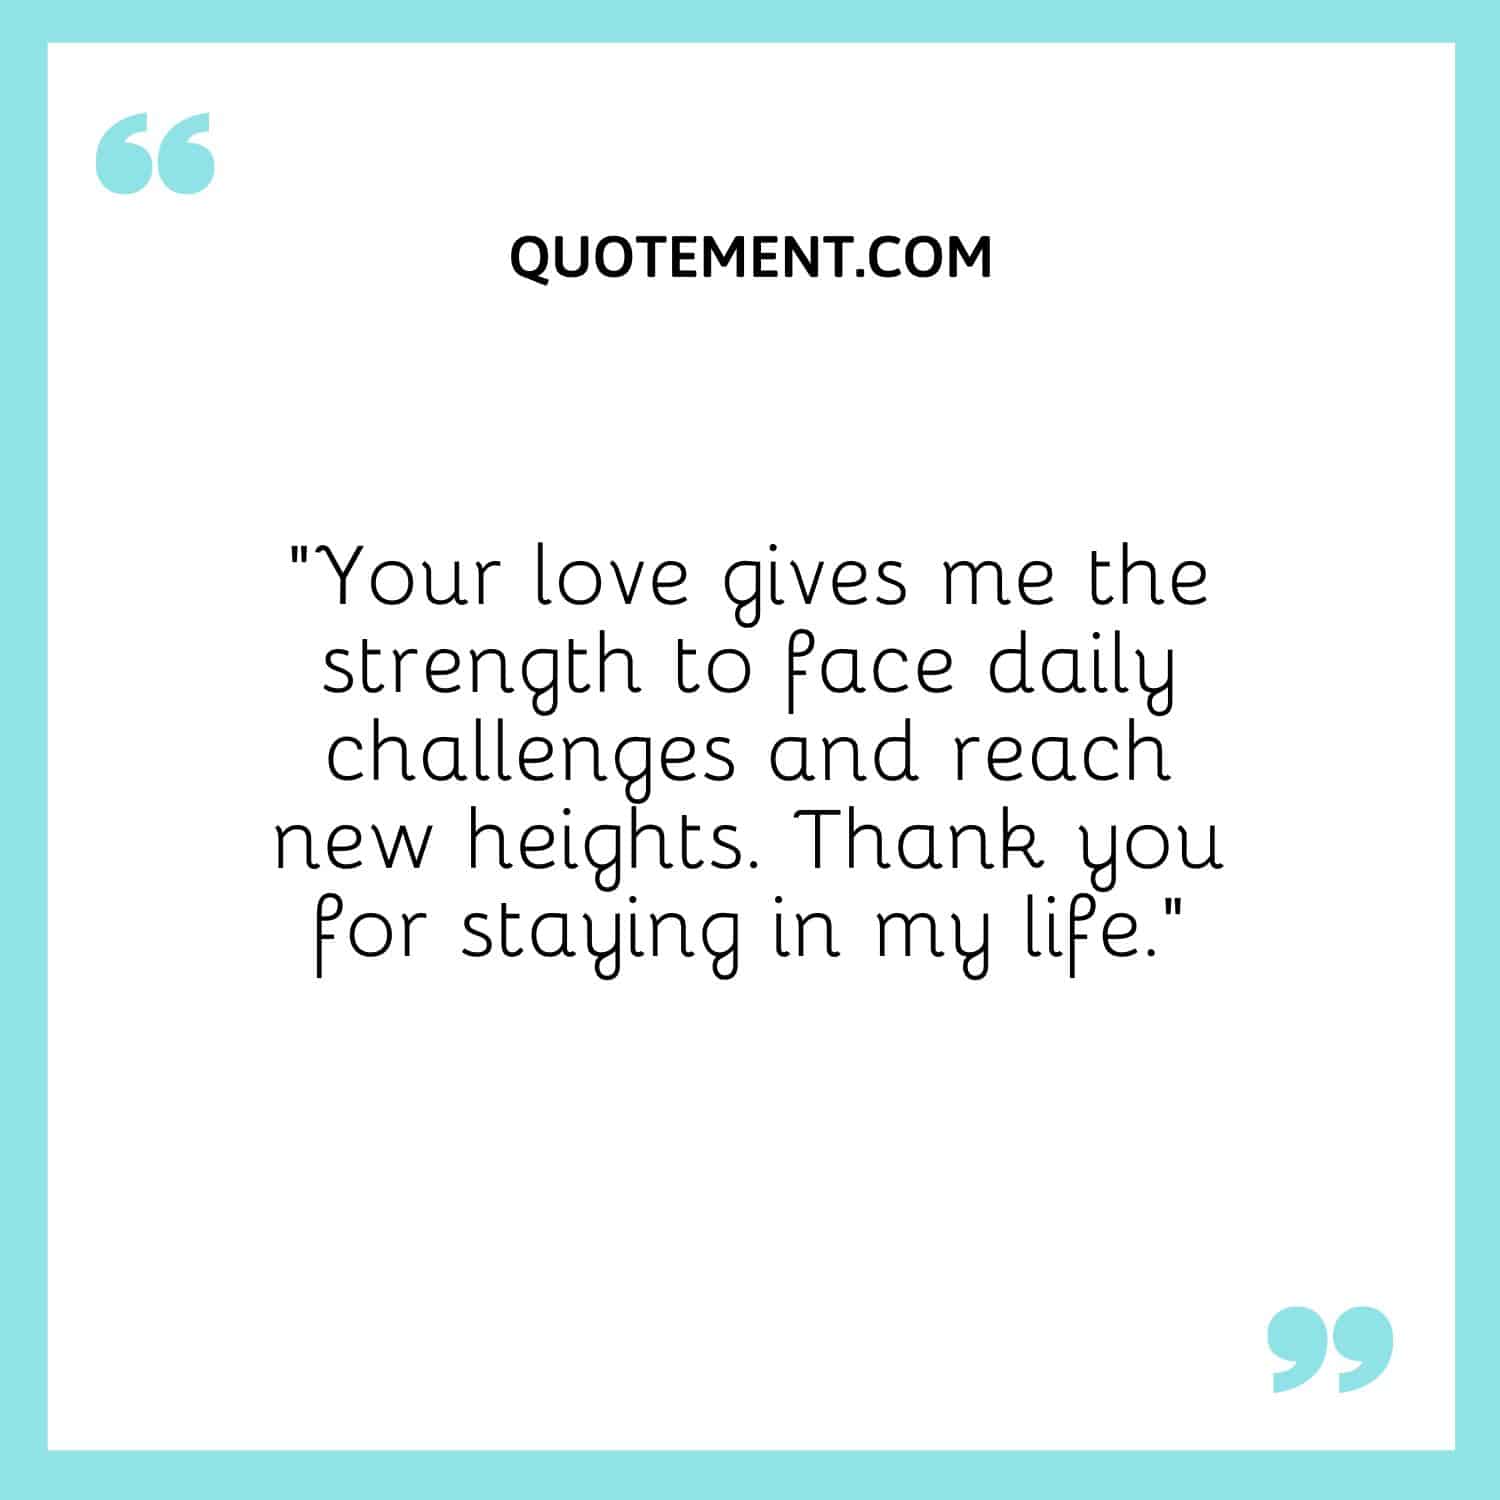 Your love gives me the strength to face daily challenges and reach new heights.